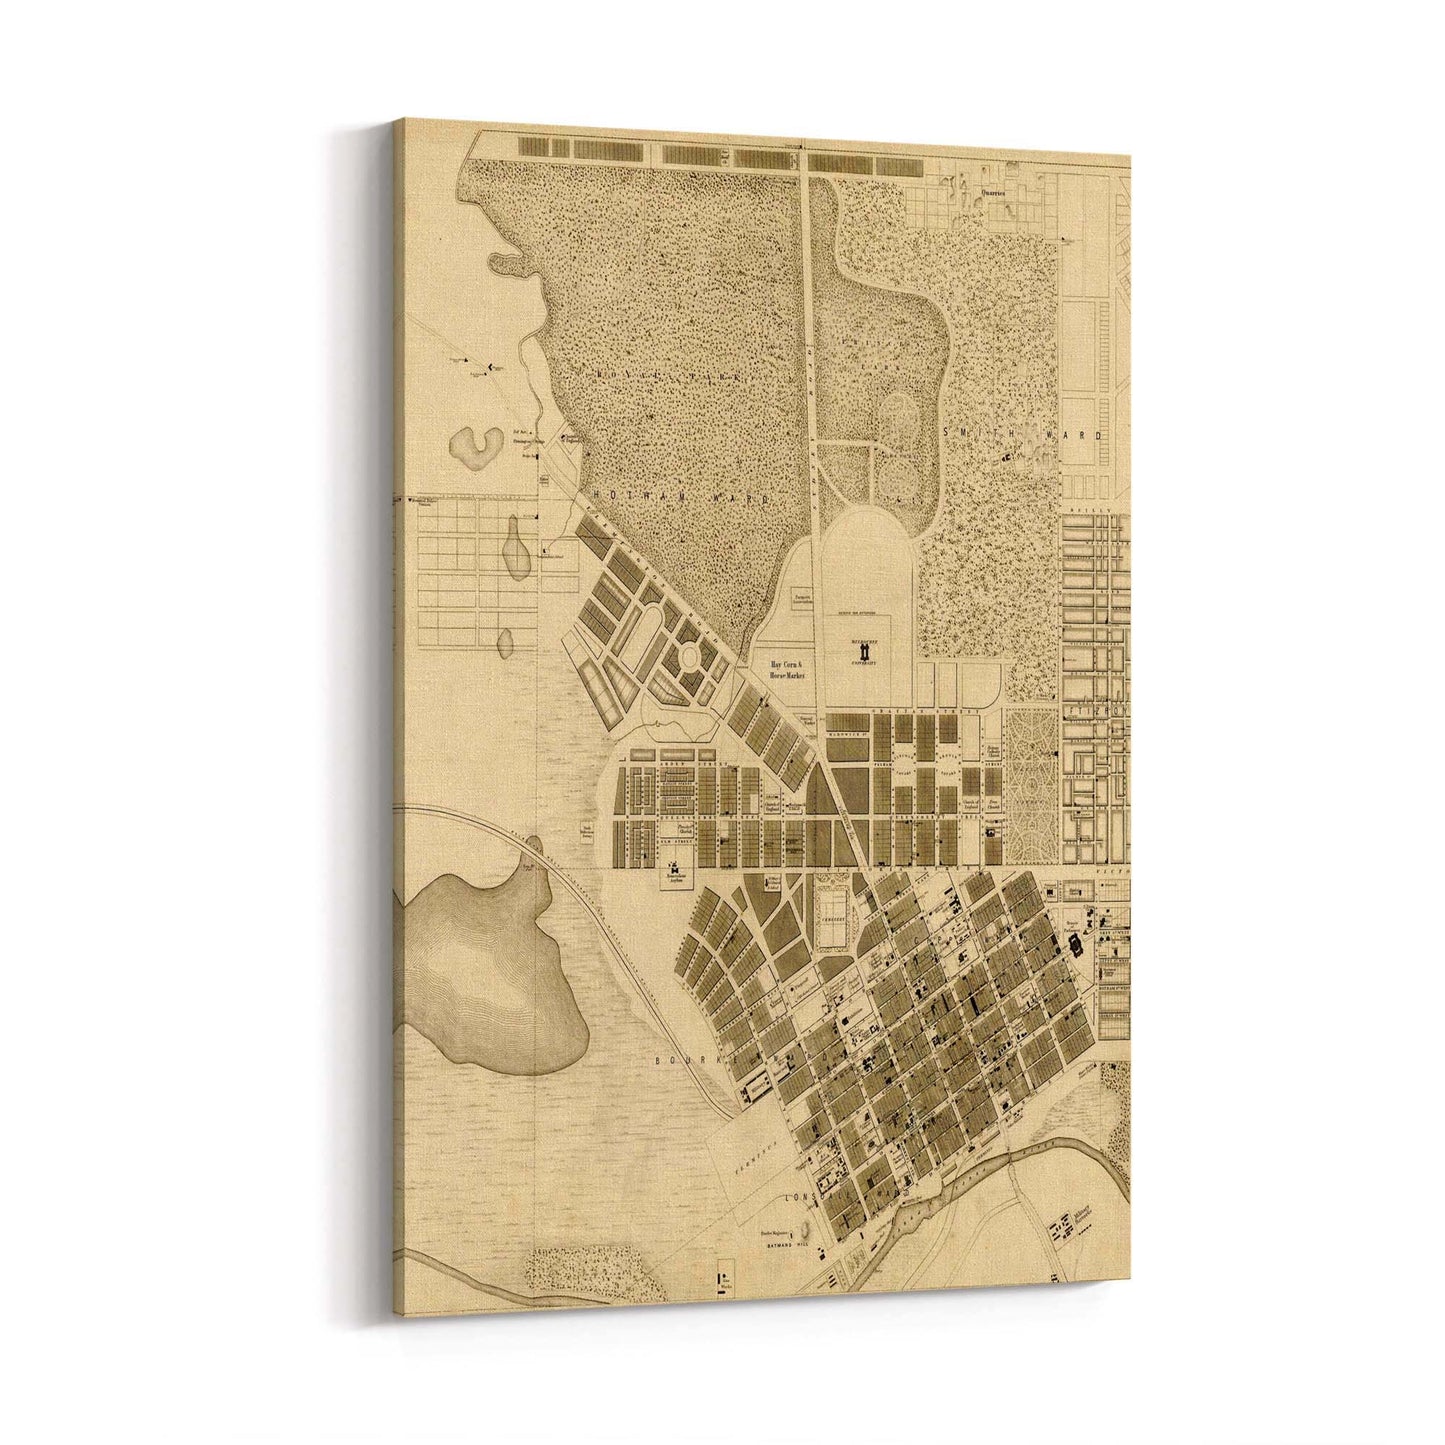 Melbourne Victoria Vintage Map Australia Wall Art #1 - The Affordable Art Company